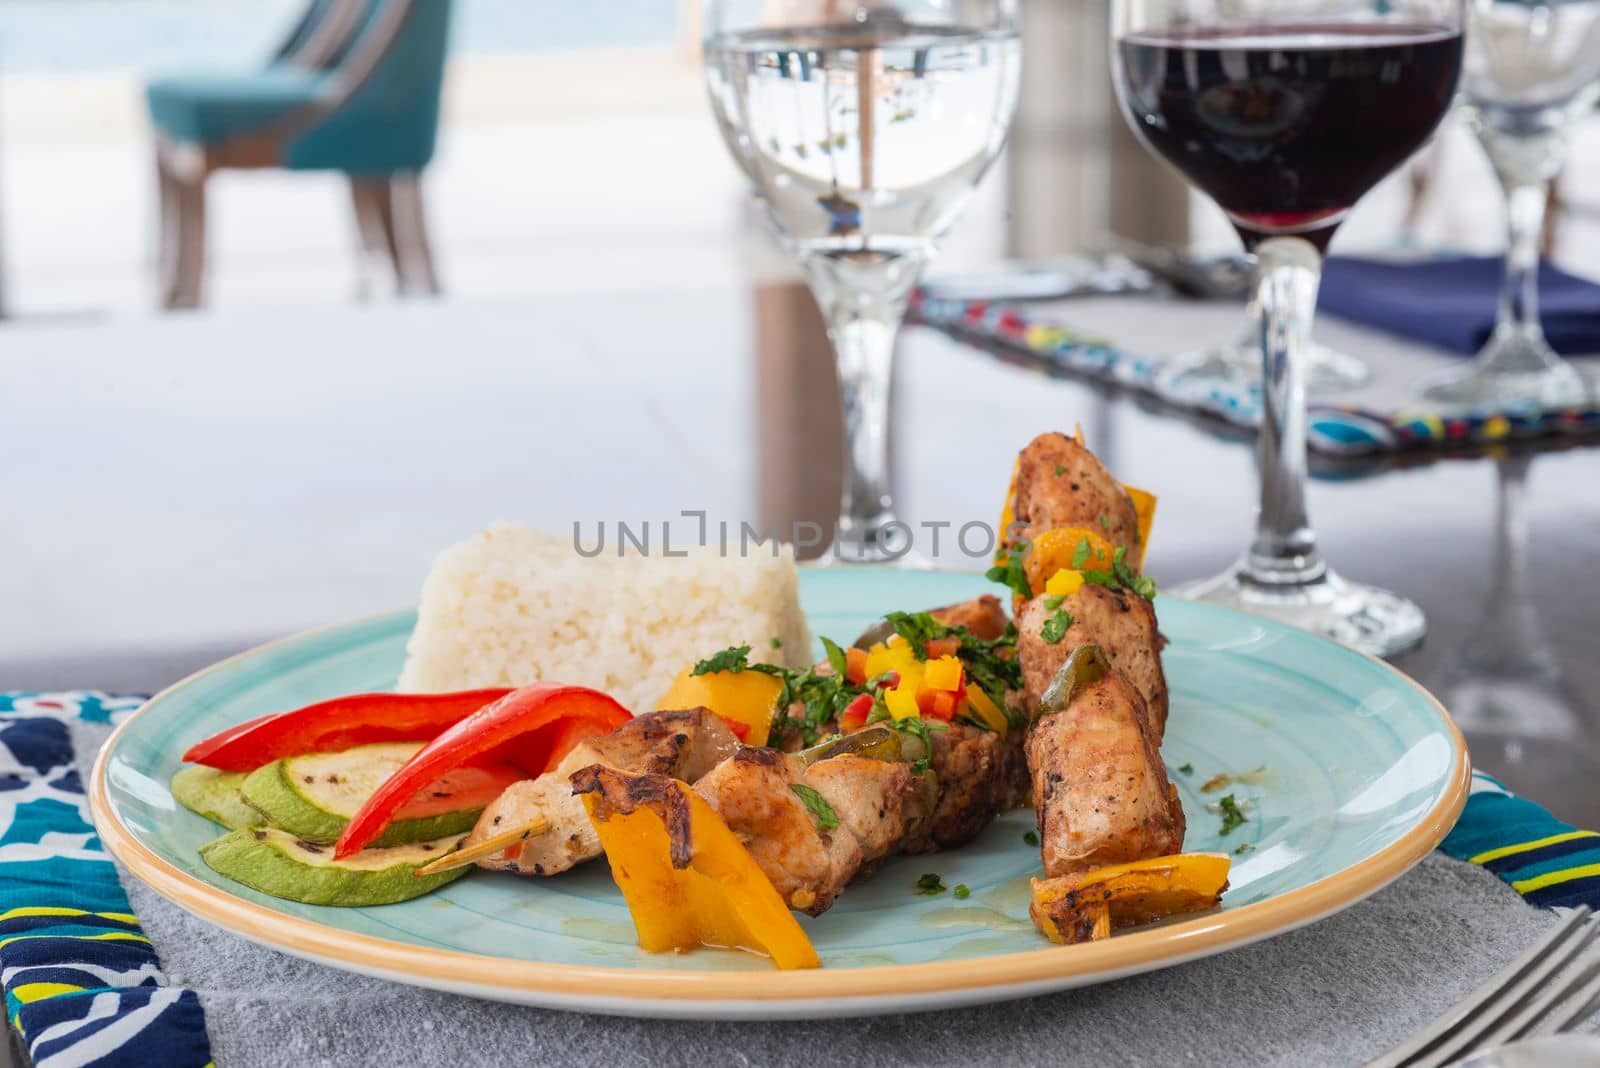 Chicken shish kebab a la carte meal with steamed white rice at restaurant table place setting